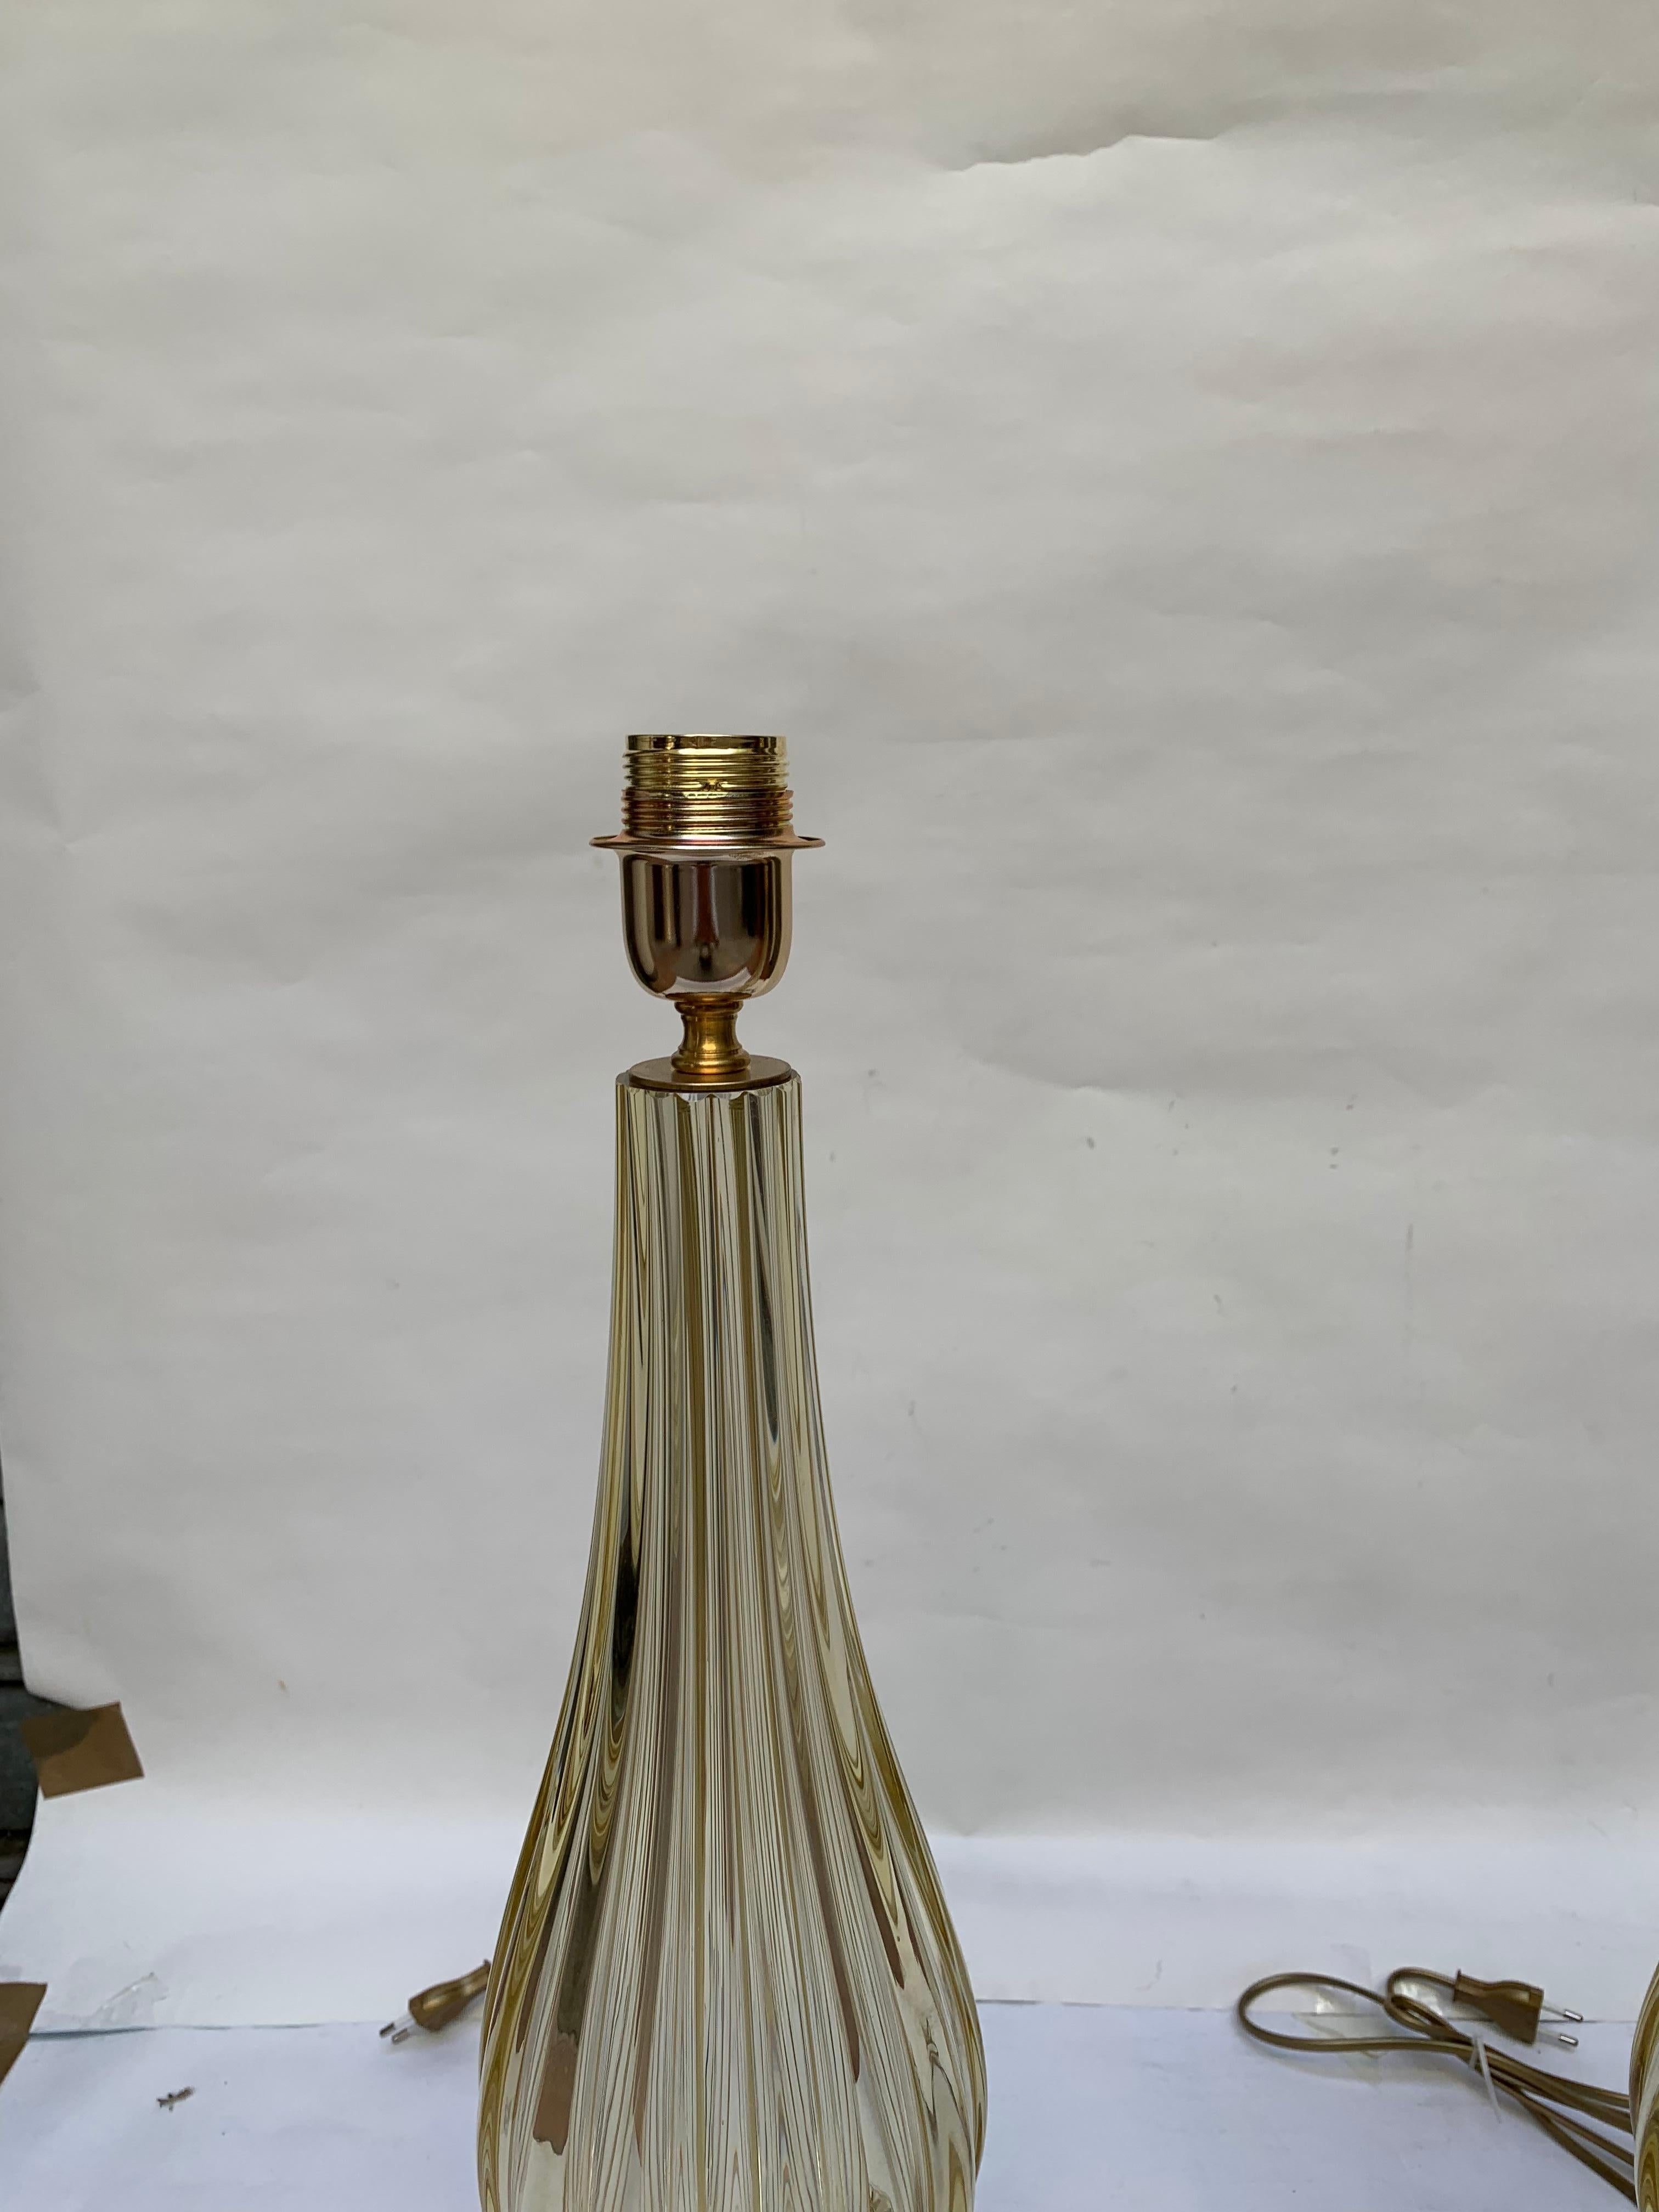 Late 20th Century Pair of Table Lamps in Murano Glass Signed “Toso”